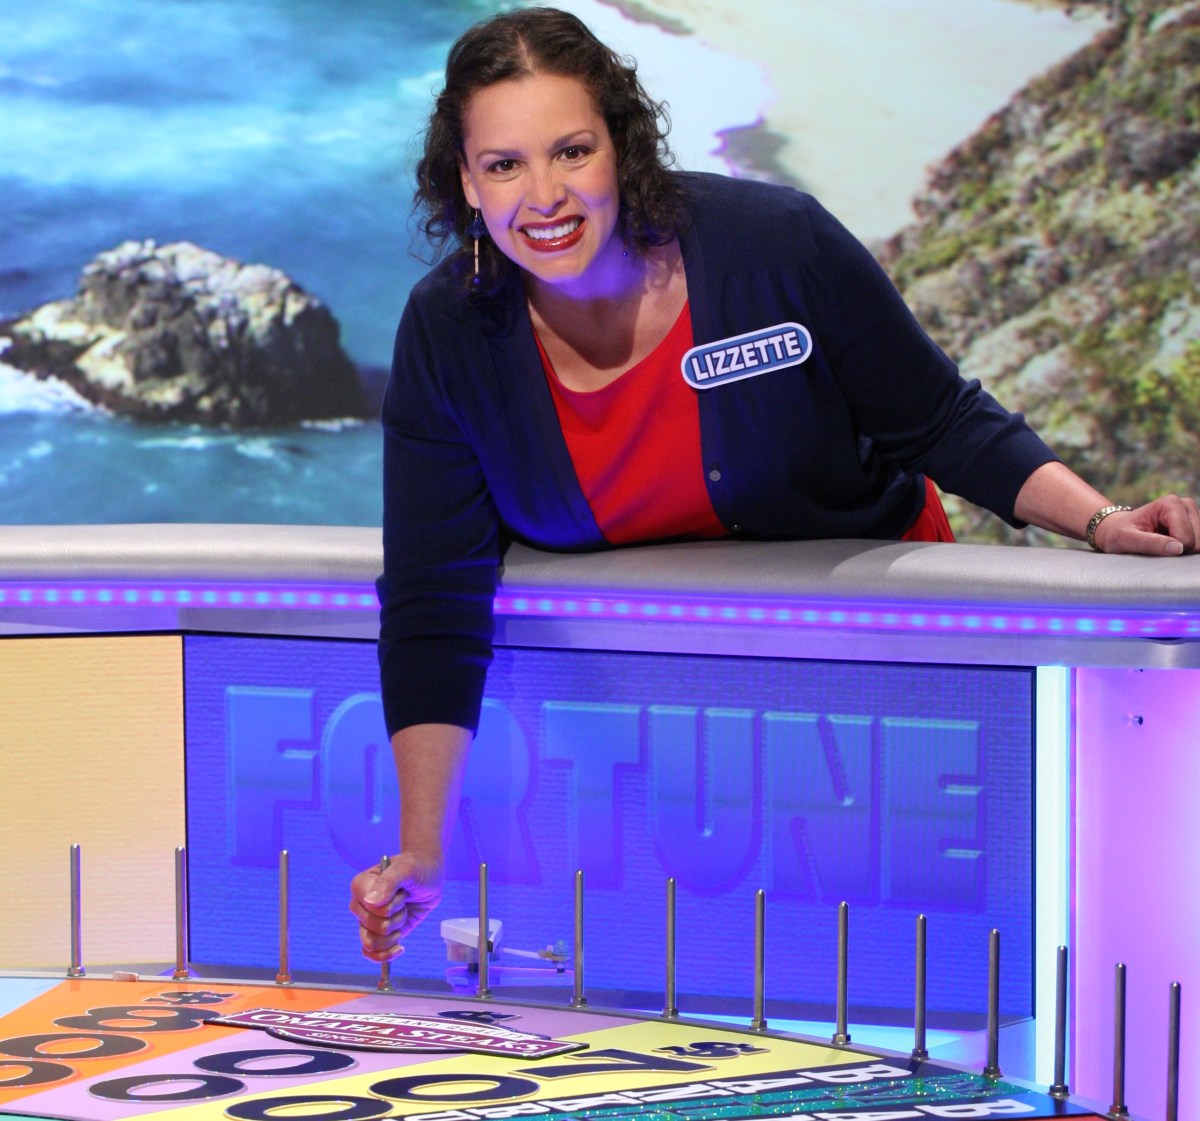 Astoria resident Lizzette Colon will appear on the Friday, May 22, episode of  "Wheel of Fortune."